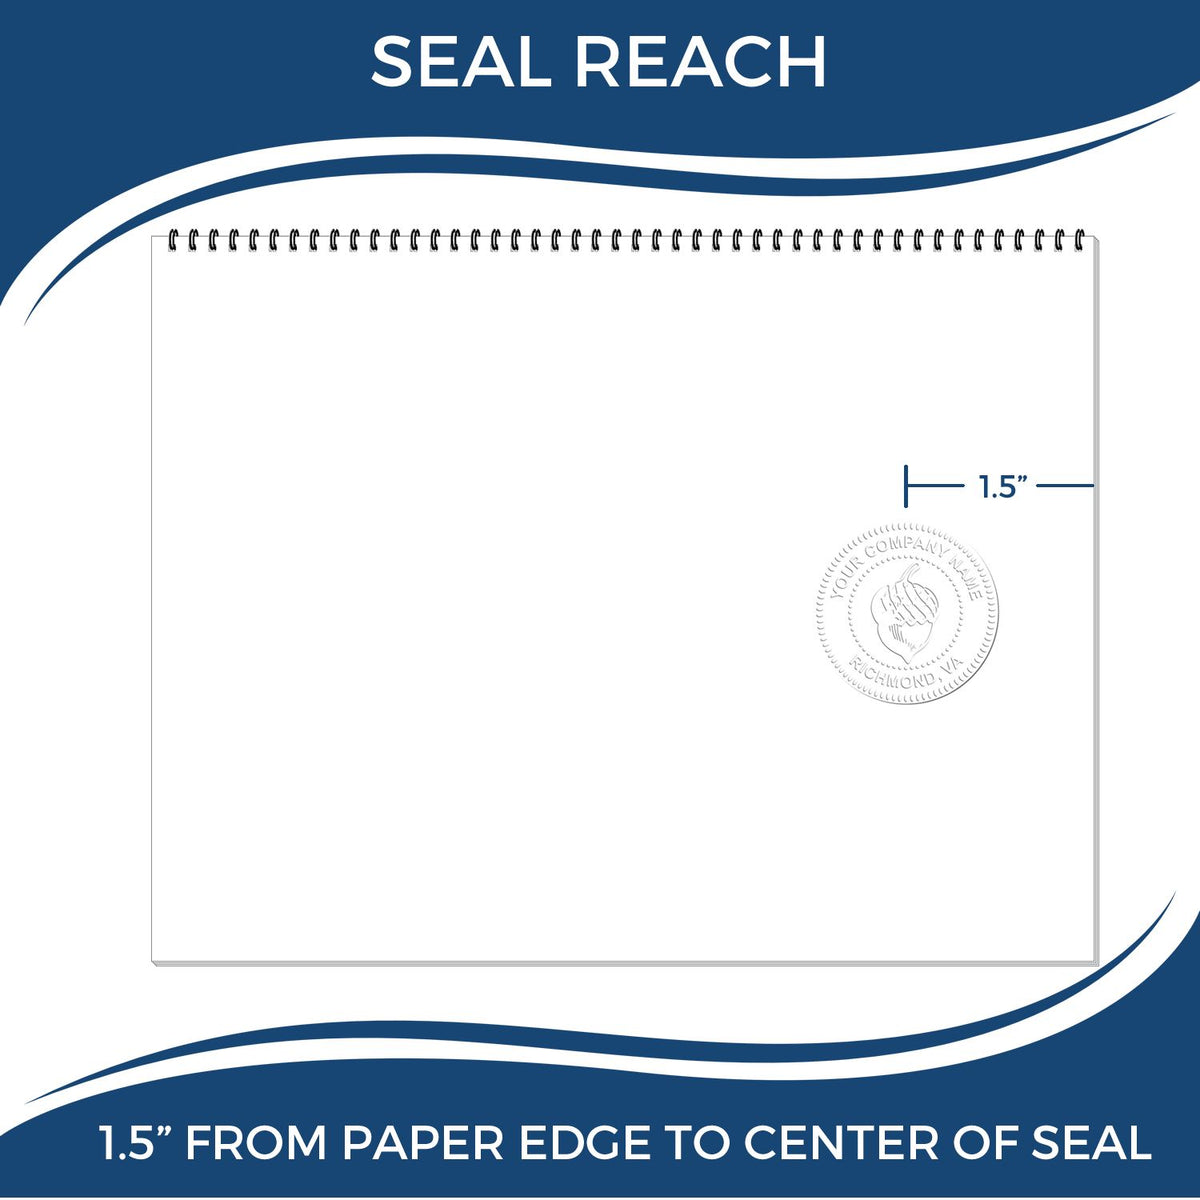 An infographic showing the seal reach which is represented by a ruler and a miniature seal image of the Hybrid California Engineer Seal